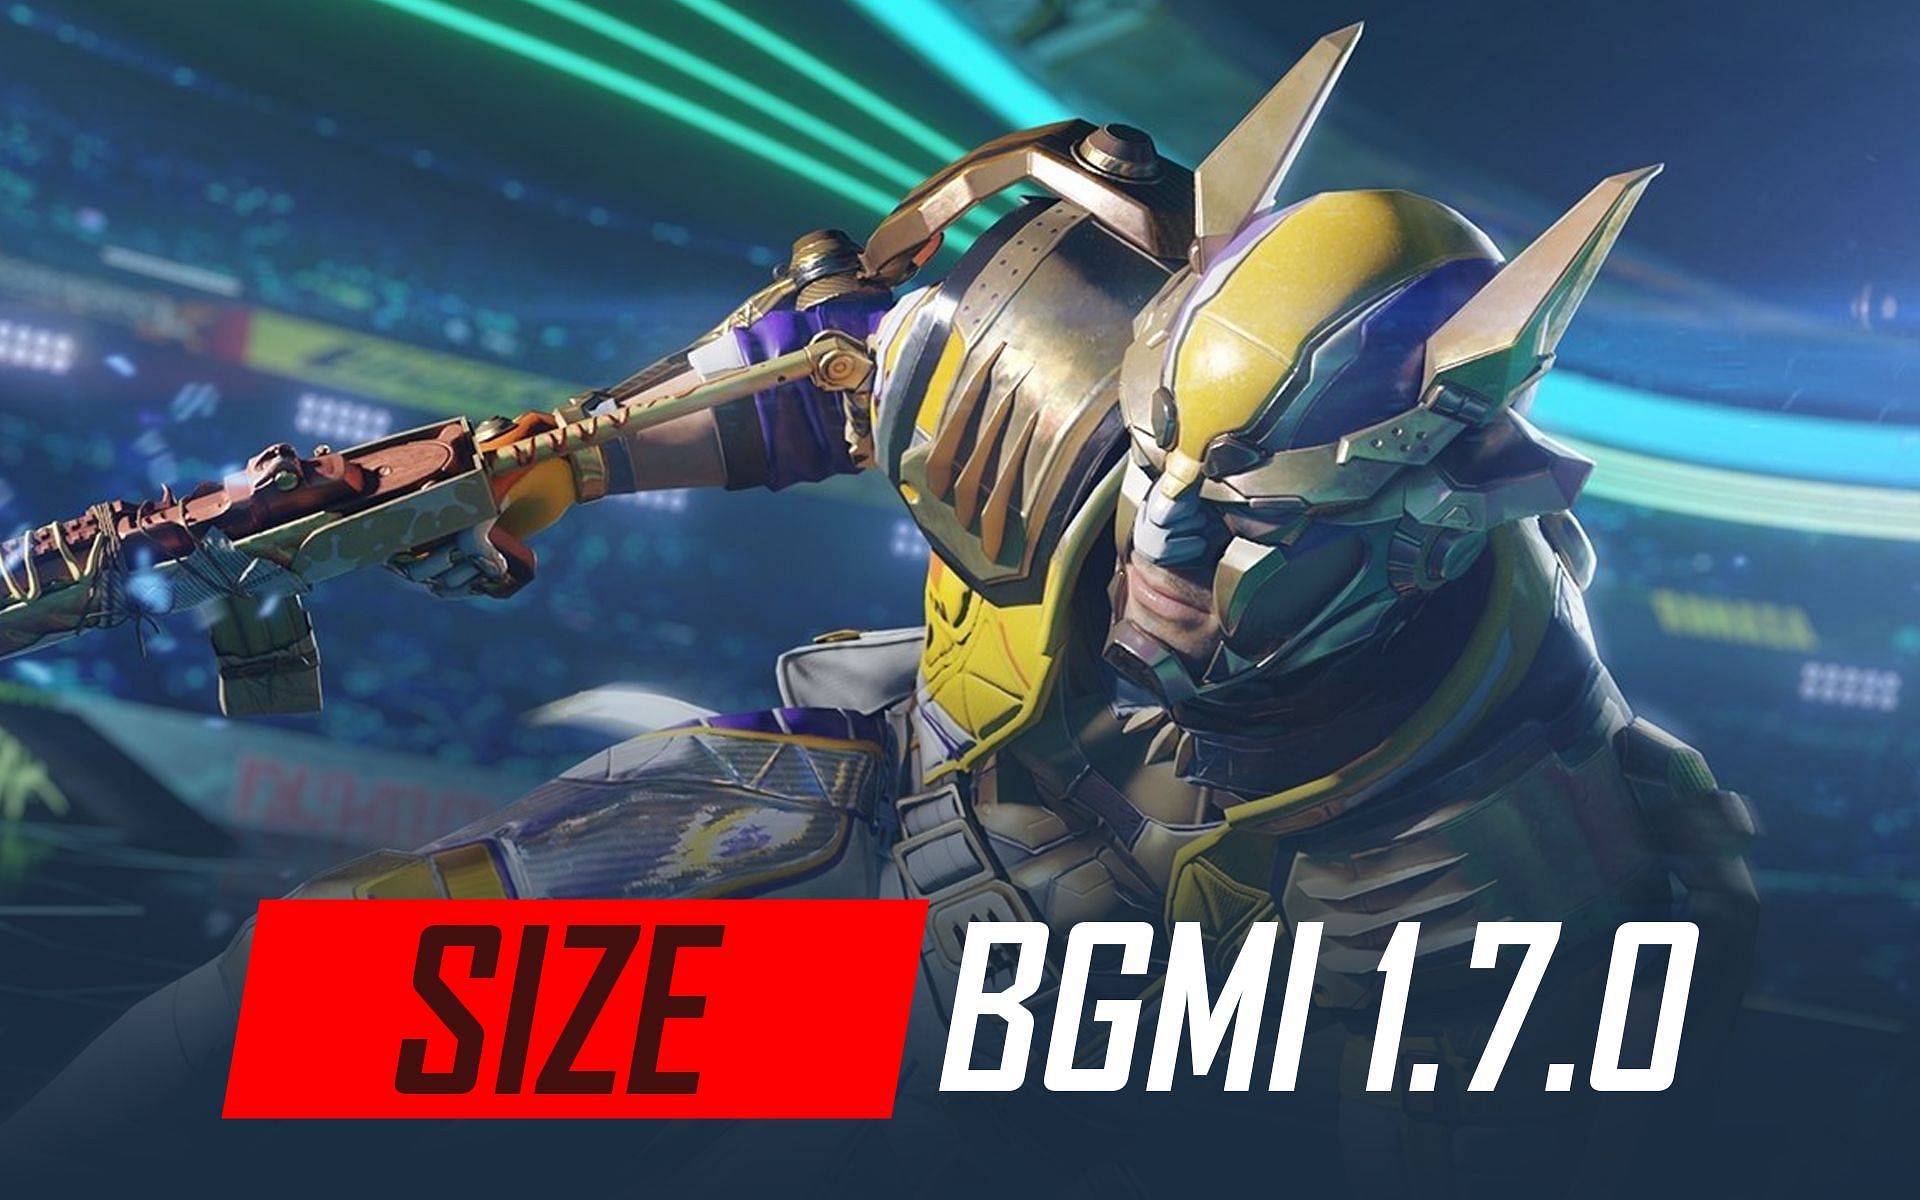 The size of the BGMI 1.7.0 update is yet to be officially revealed (Image via Sportskeeda)